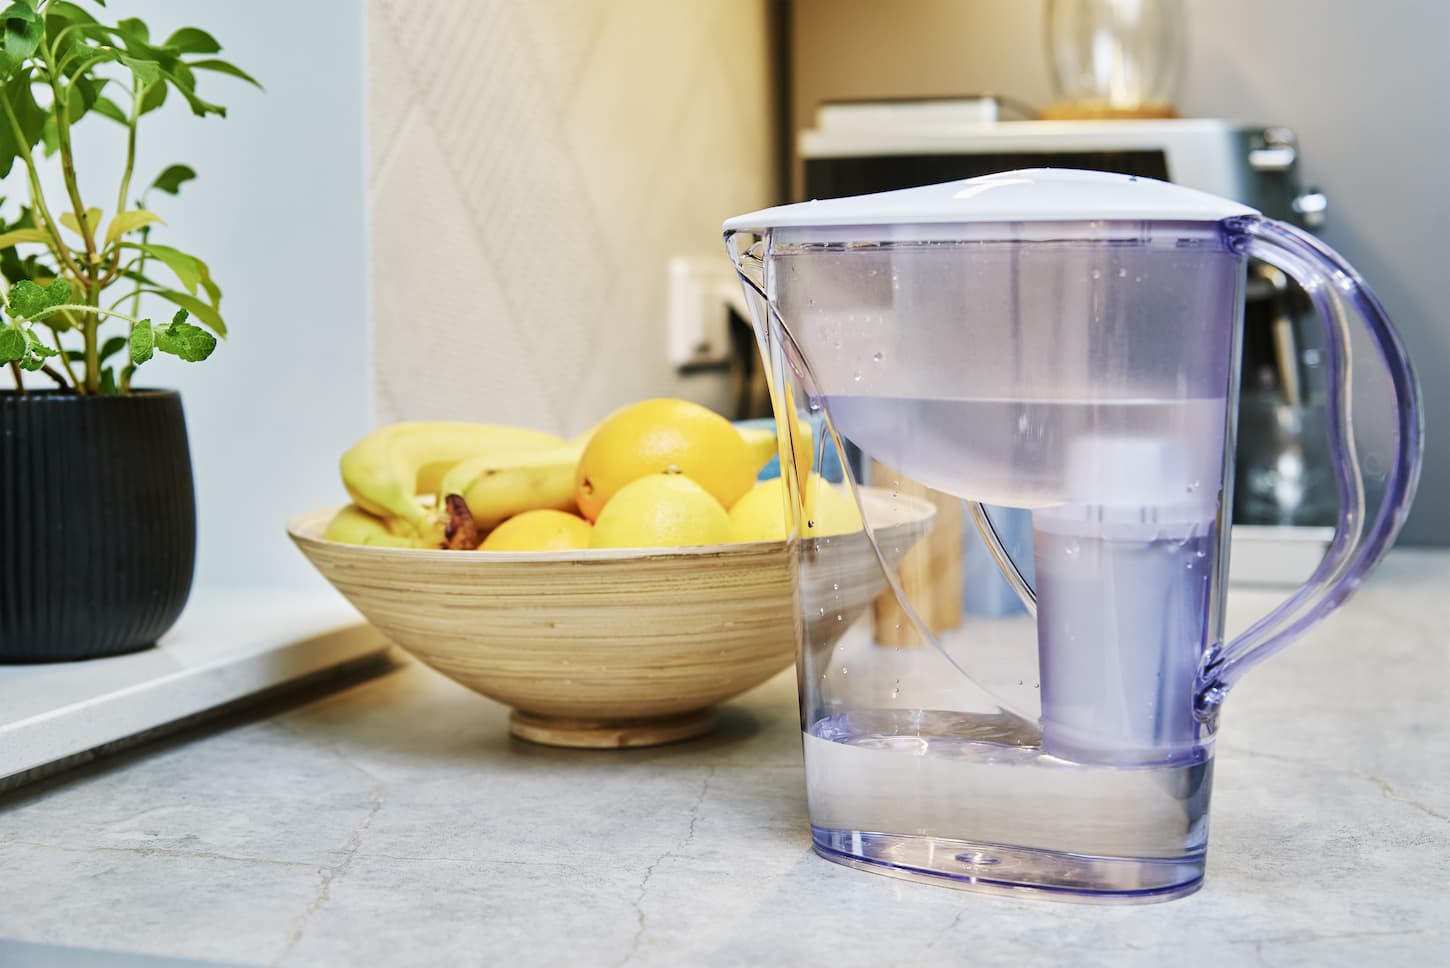 An image of a tray of lemon and a filtered water on a water filter in the kitchen counter.